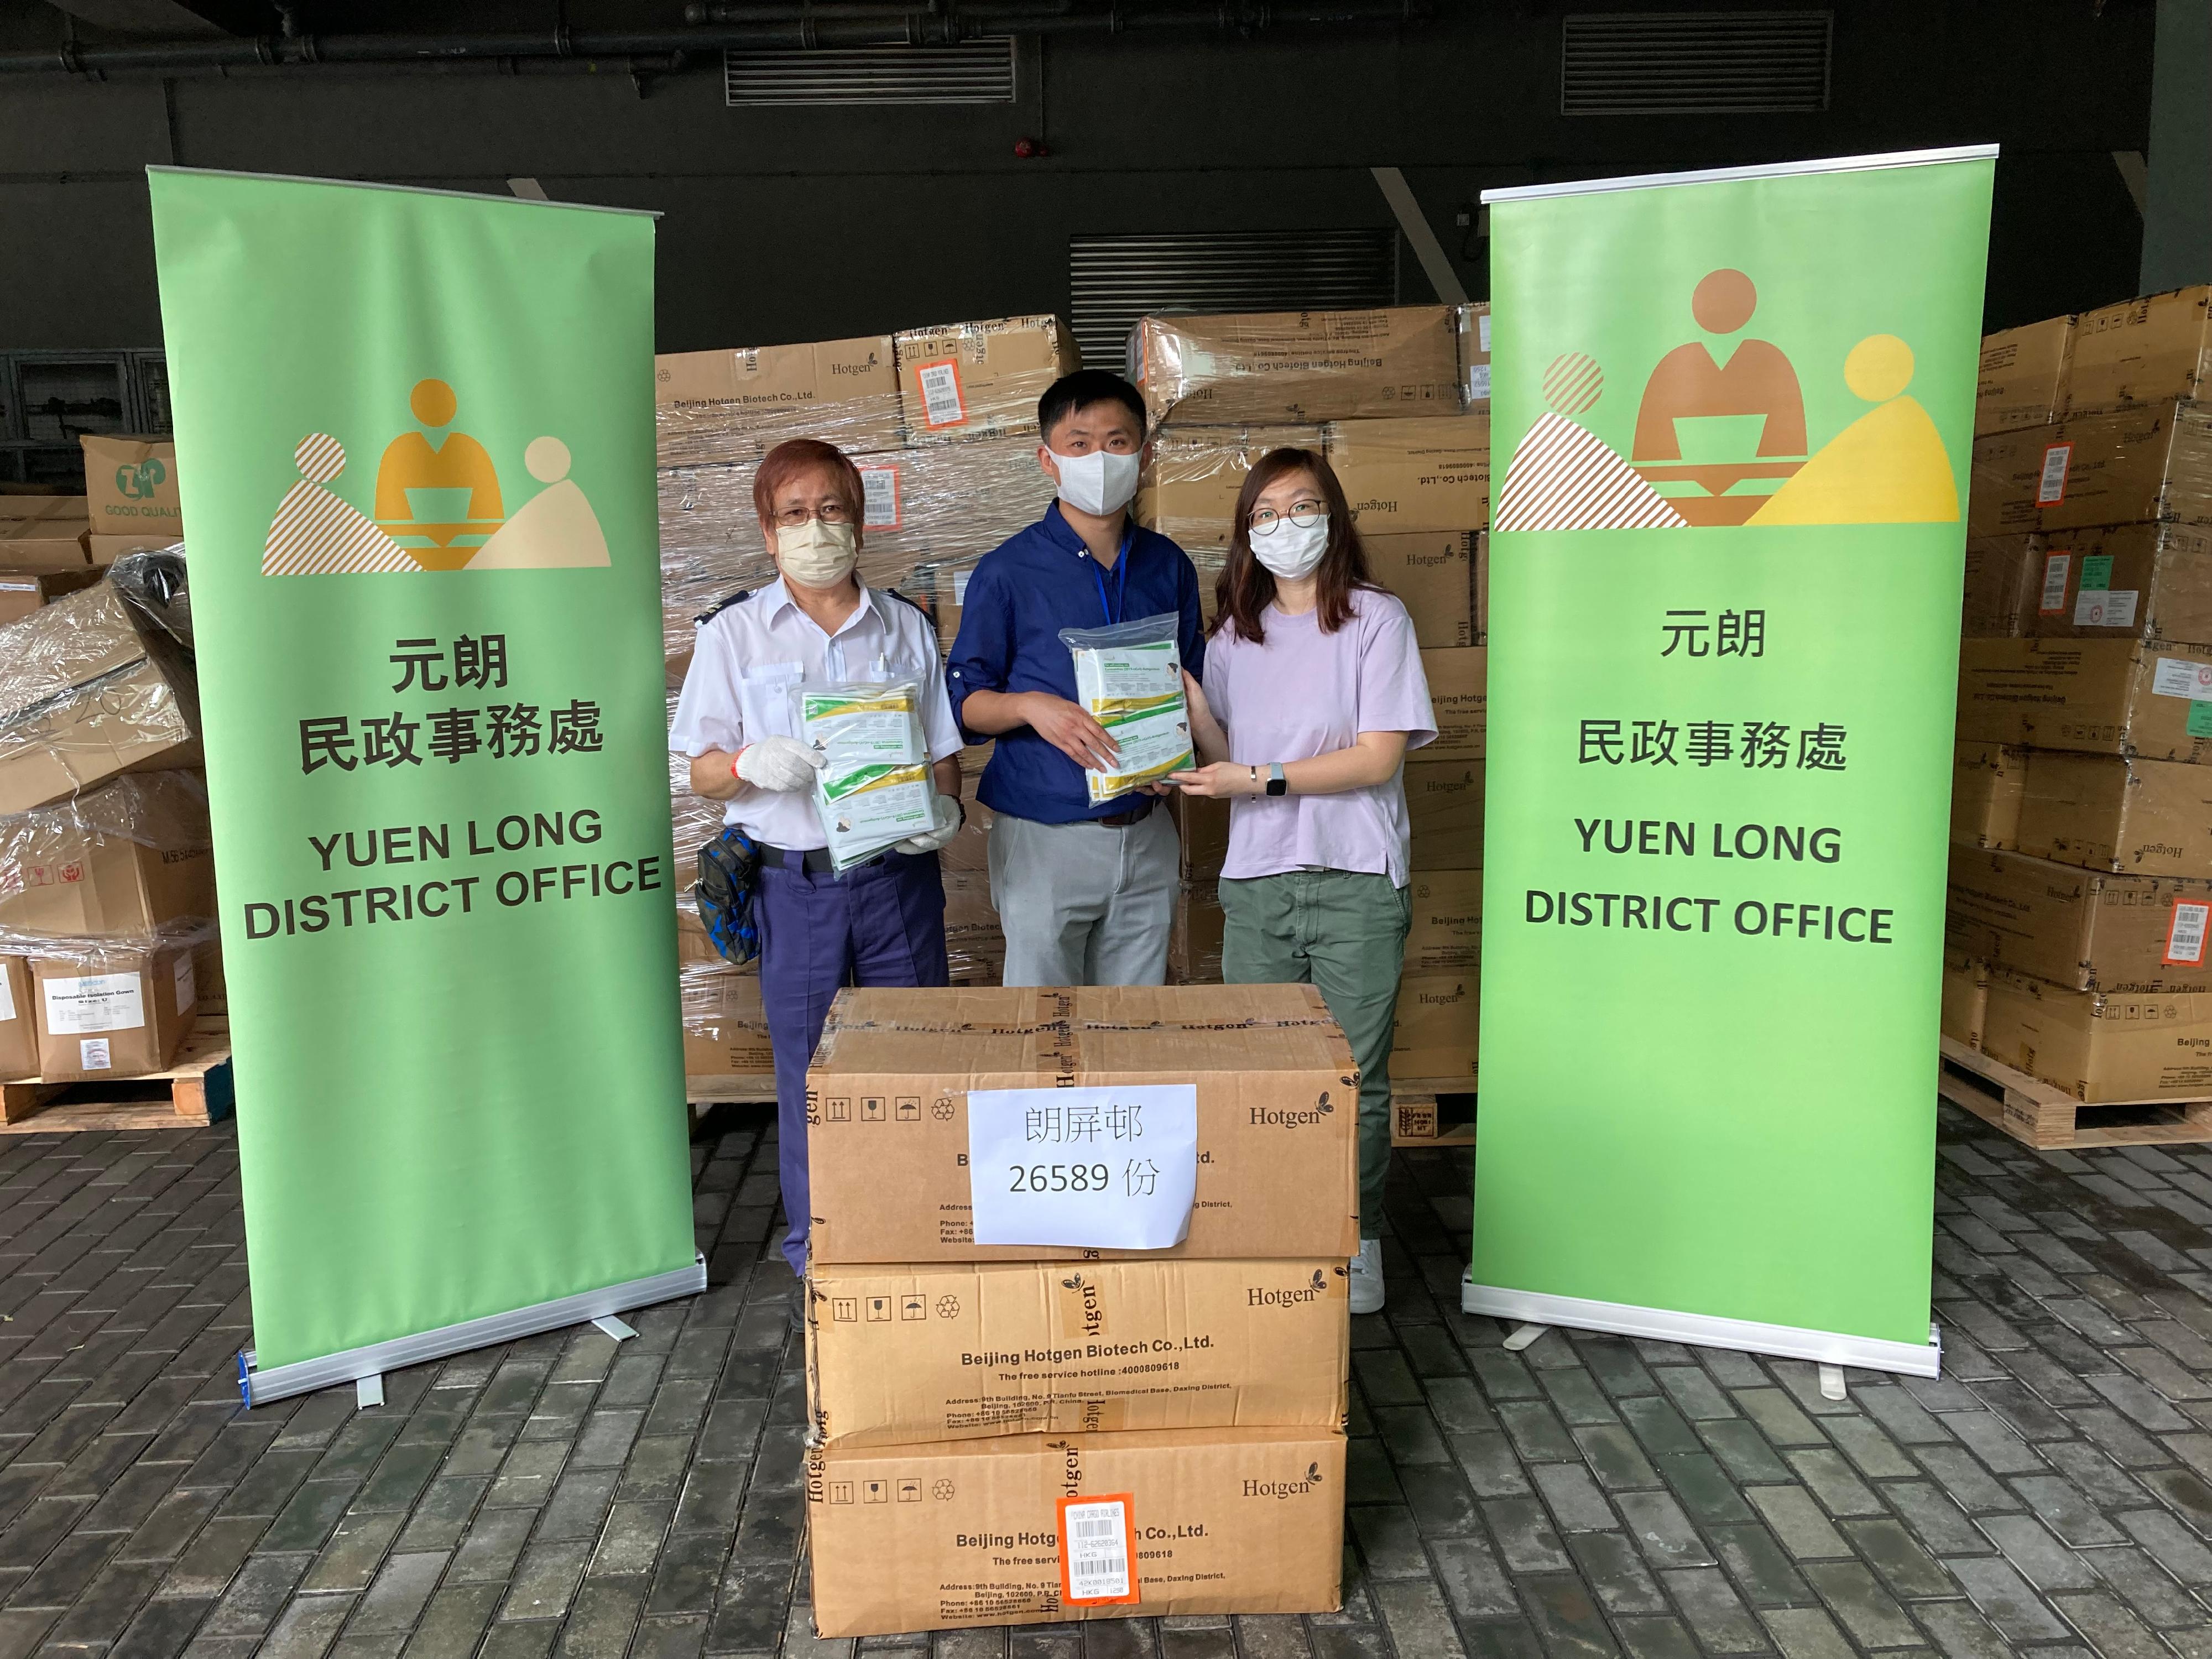 The Yuen Long District Office today (May 30) distributed COVID-19 rapid test kits to households, cleansing workers and property management staff living and working in Long Ping Estate for voluntary testing through the property management company.